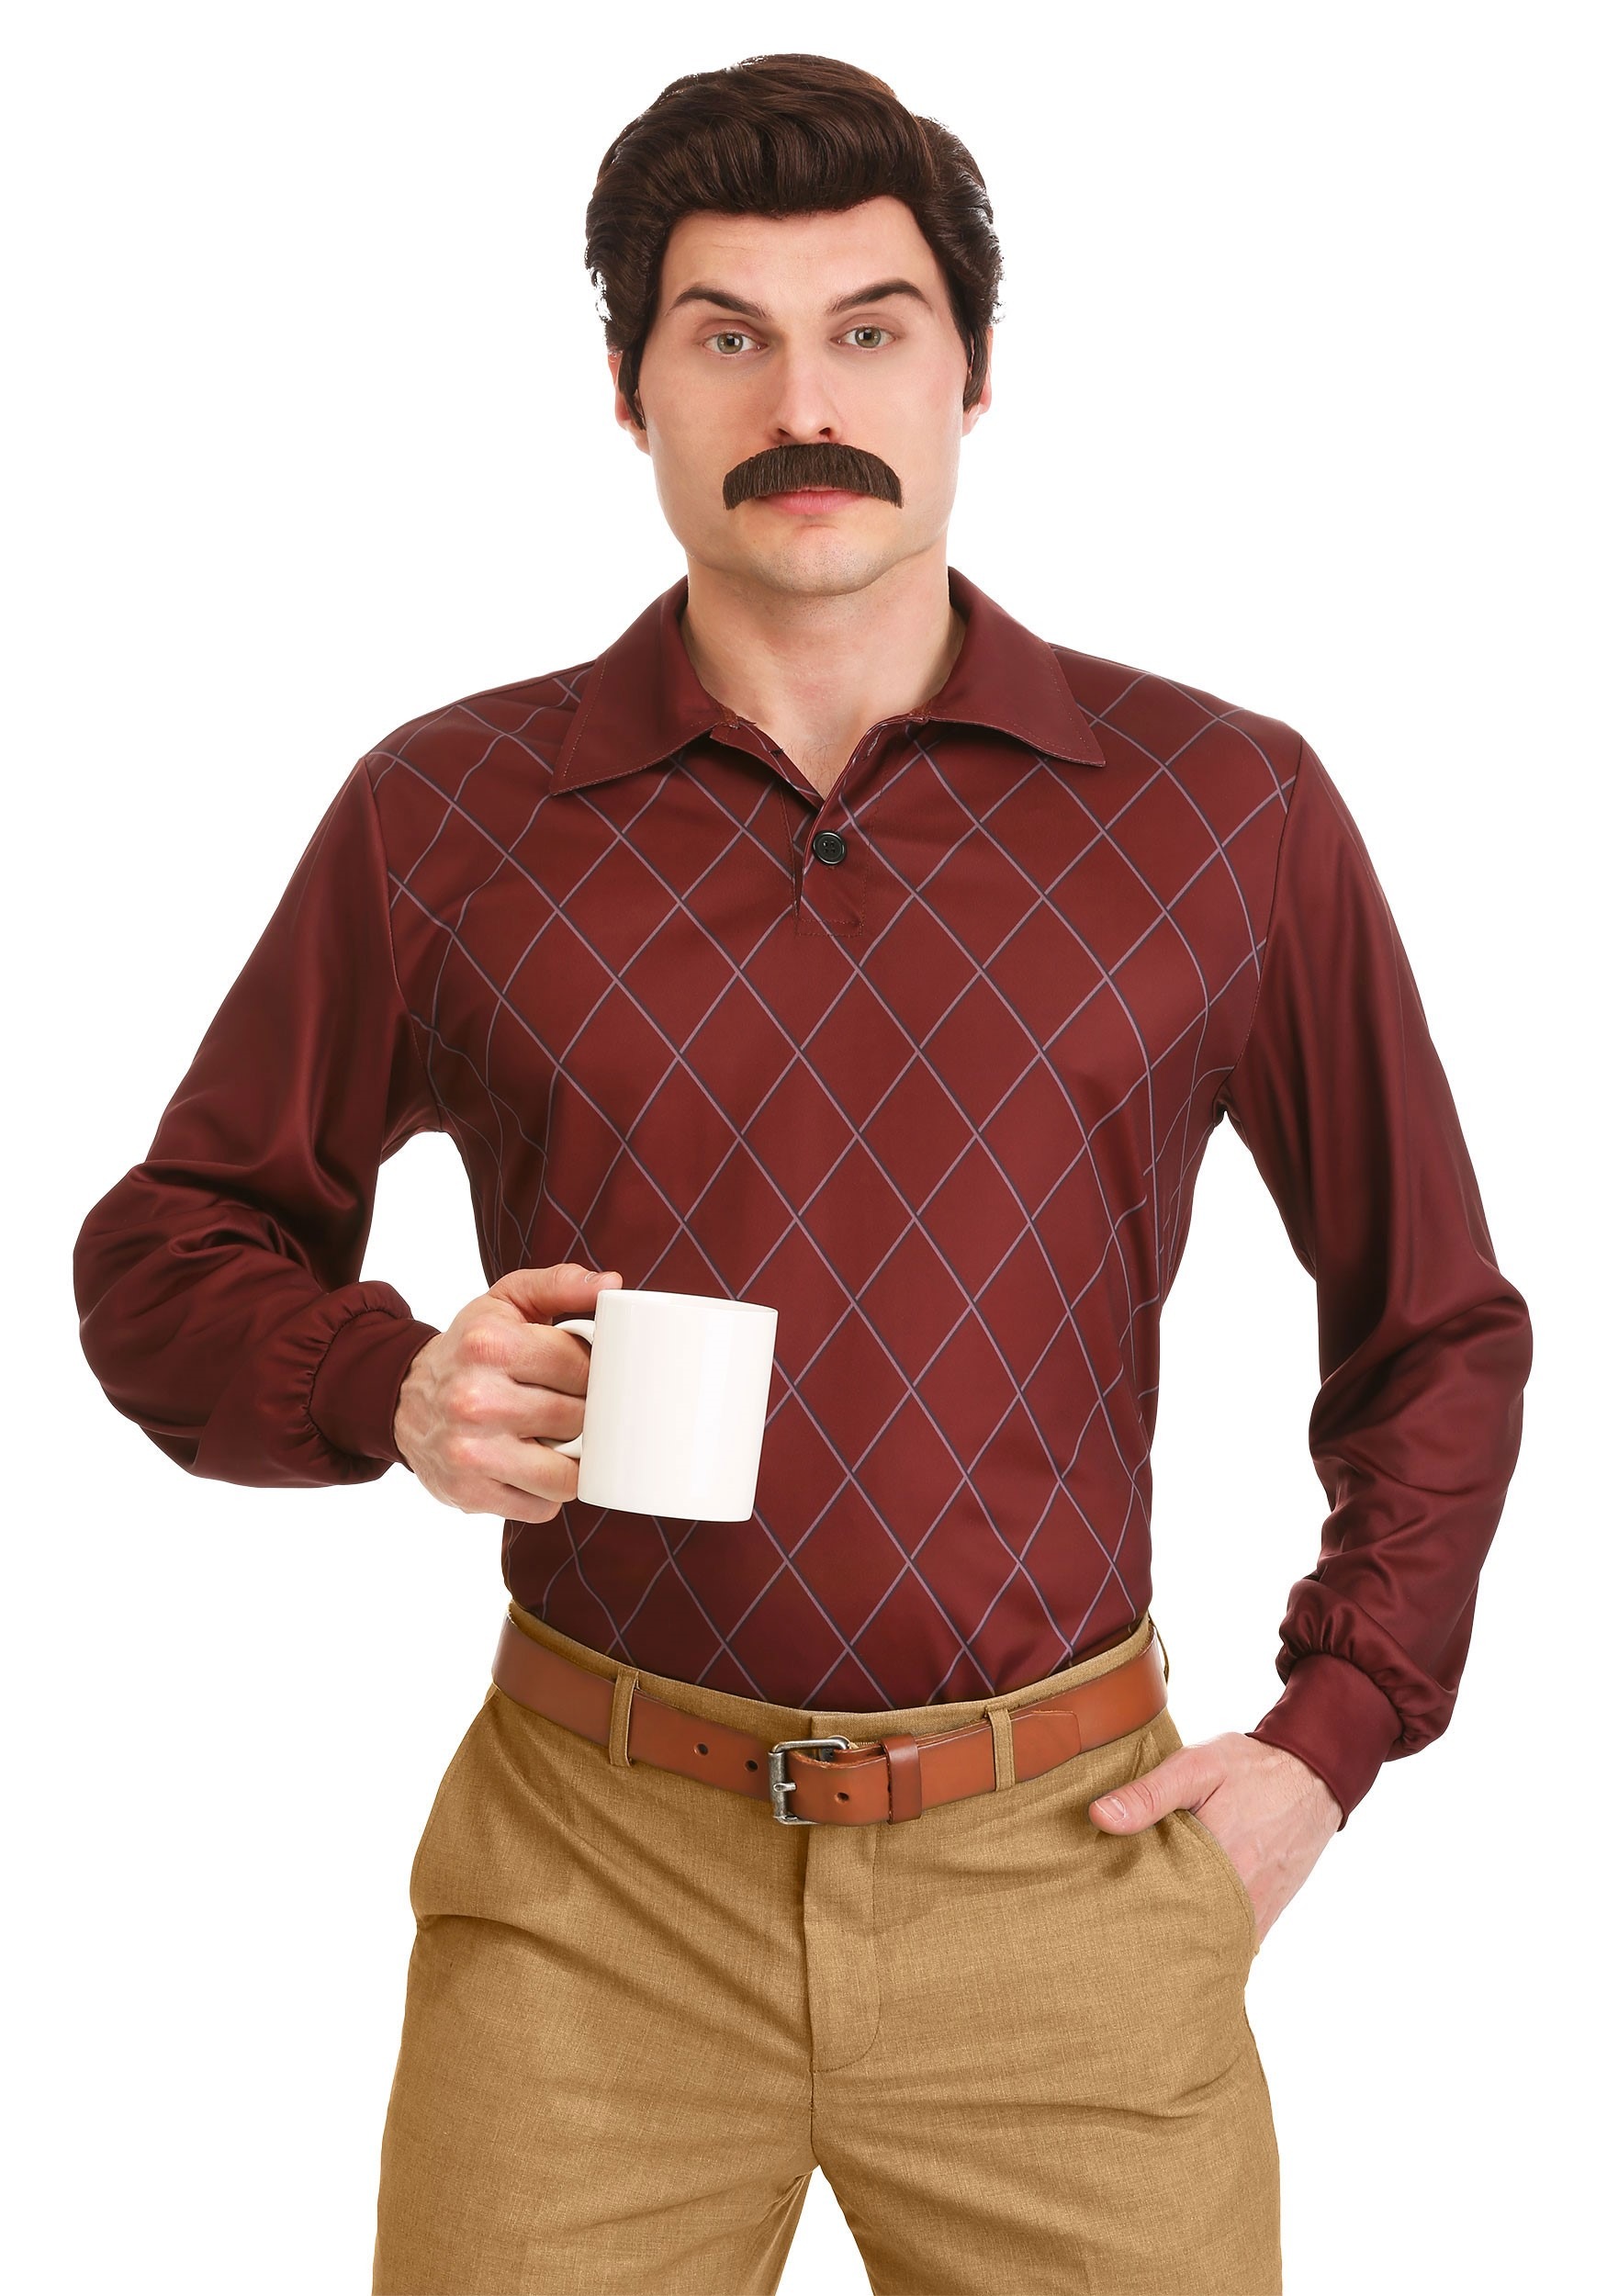 Ron Swanson Parks and Recreation Costume